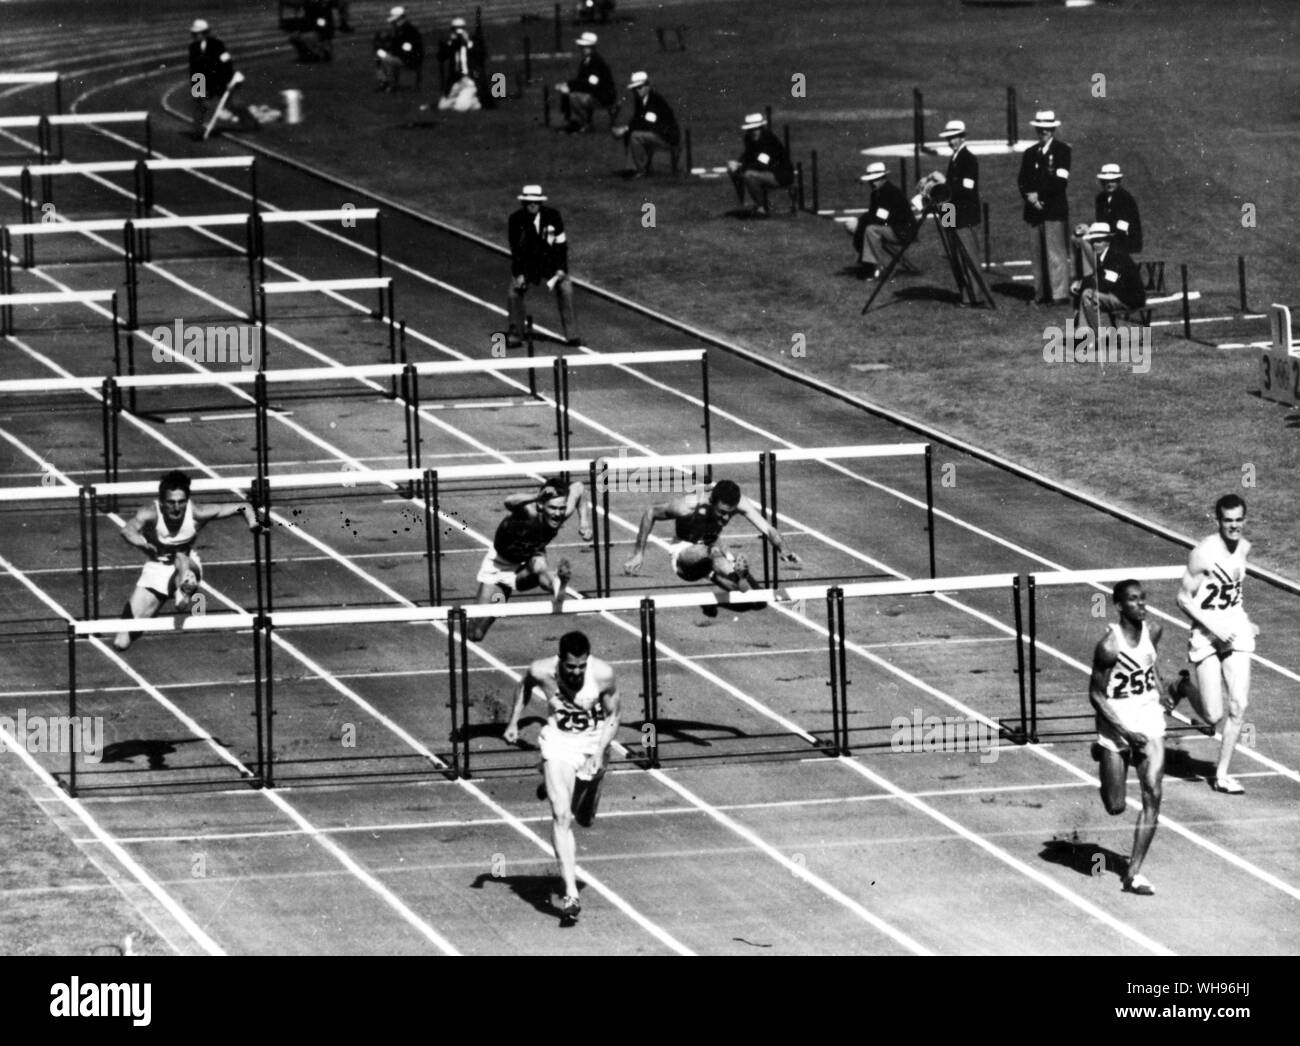 Aus., Melbourne, Olympics, 1956: 1-2-3 for USA! The field takes the last hurdle of the olympic 110-metre hurdles, won by Lee Calhoun of USA () in the new record time of 13.5 seconds. Second was Jack Davis () and third was Joel Shankle ().. Stock Photo